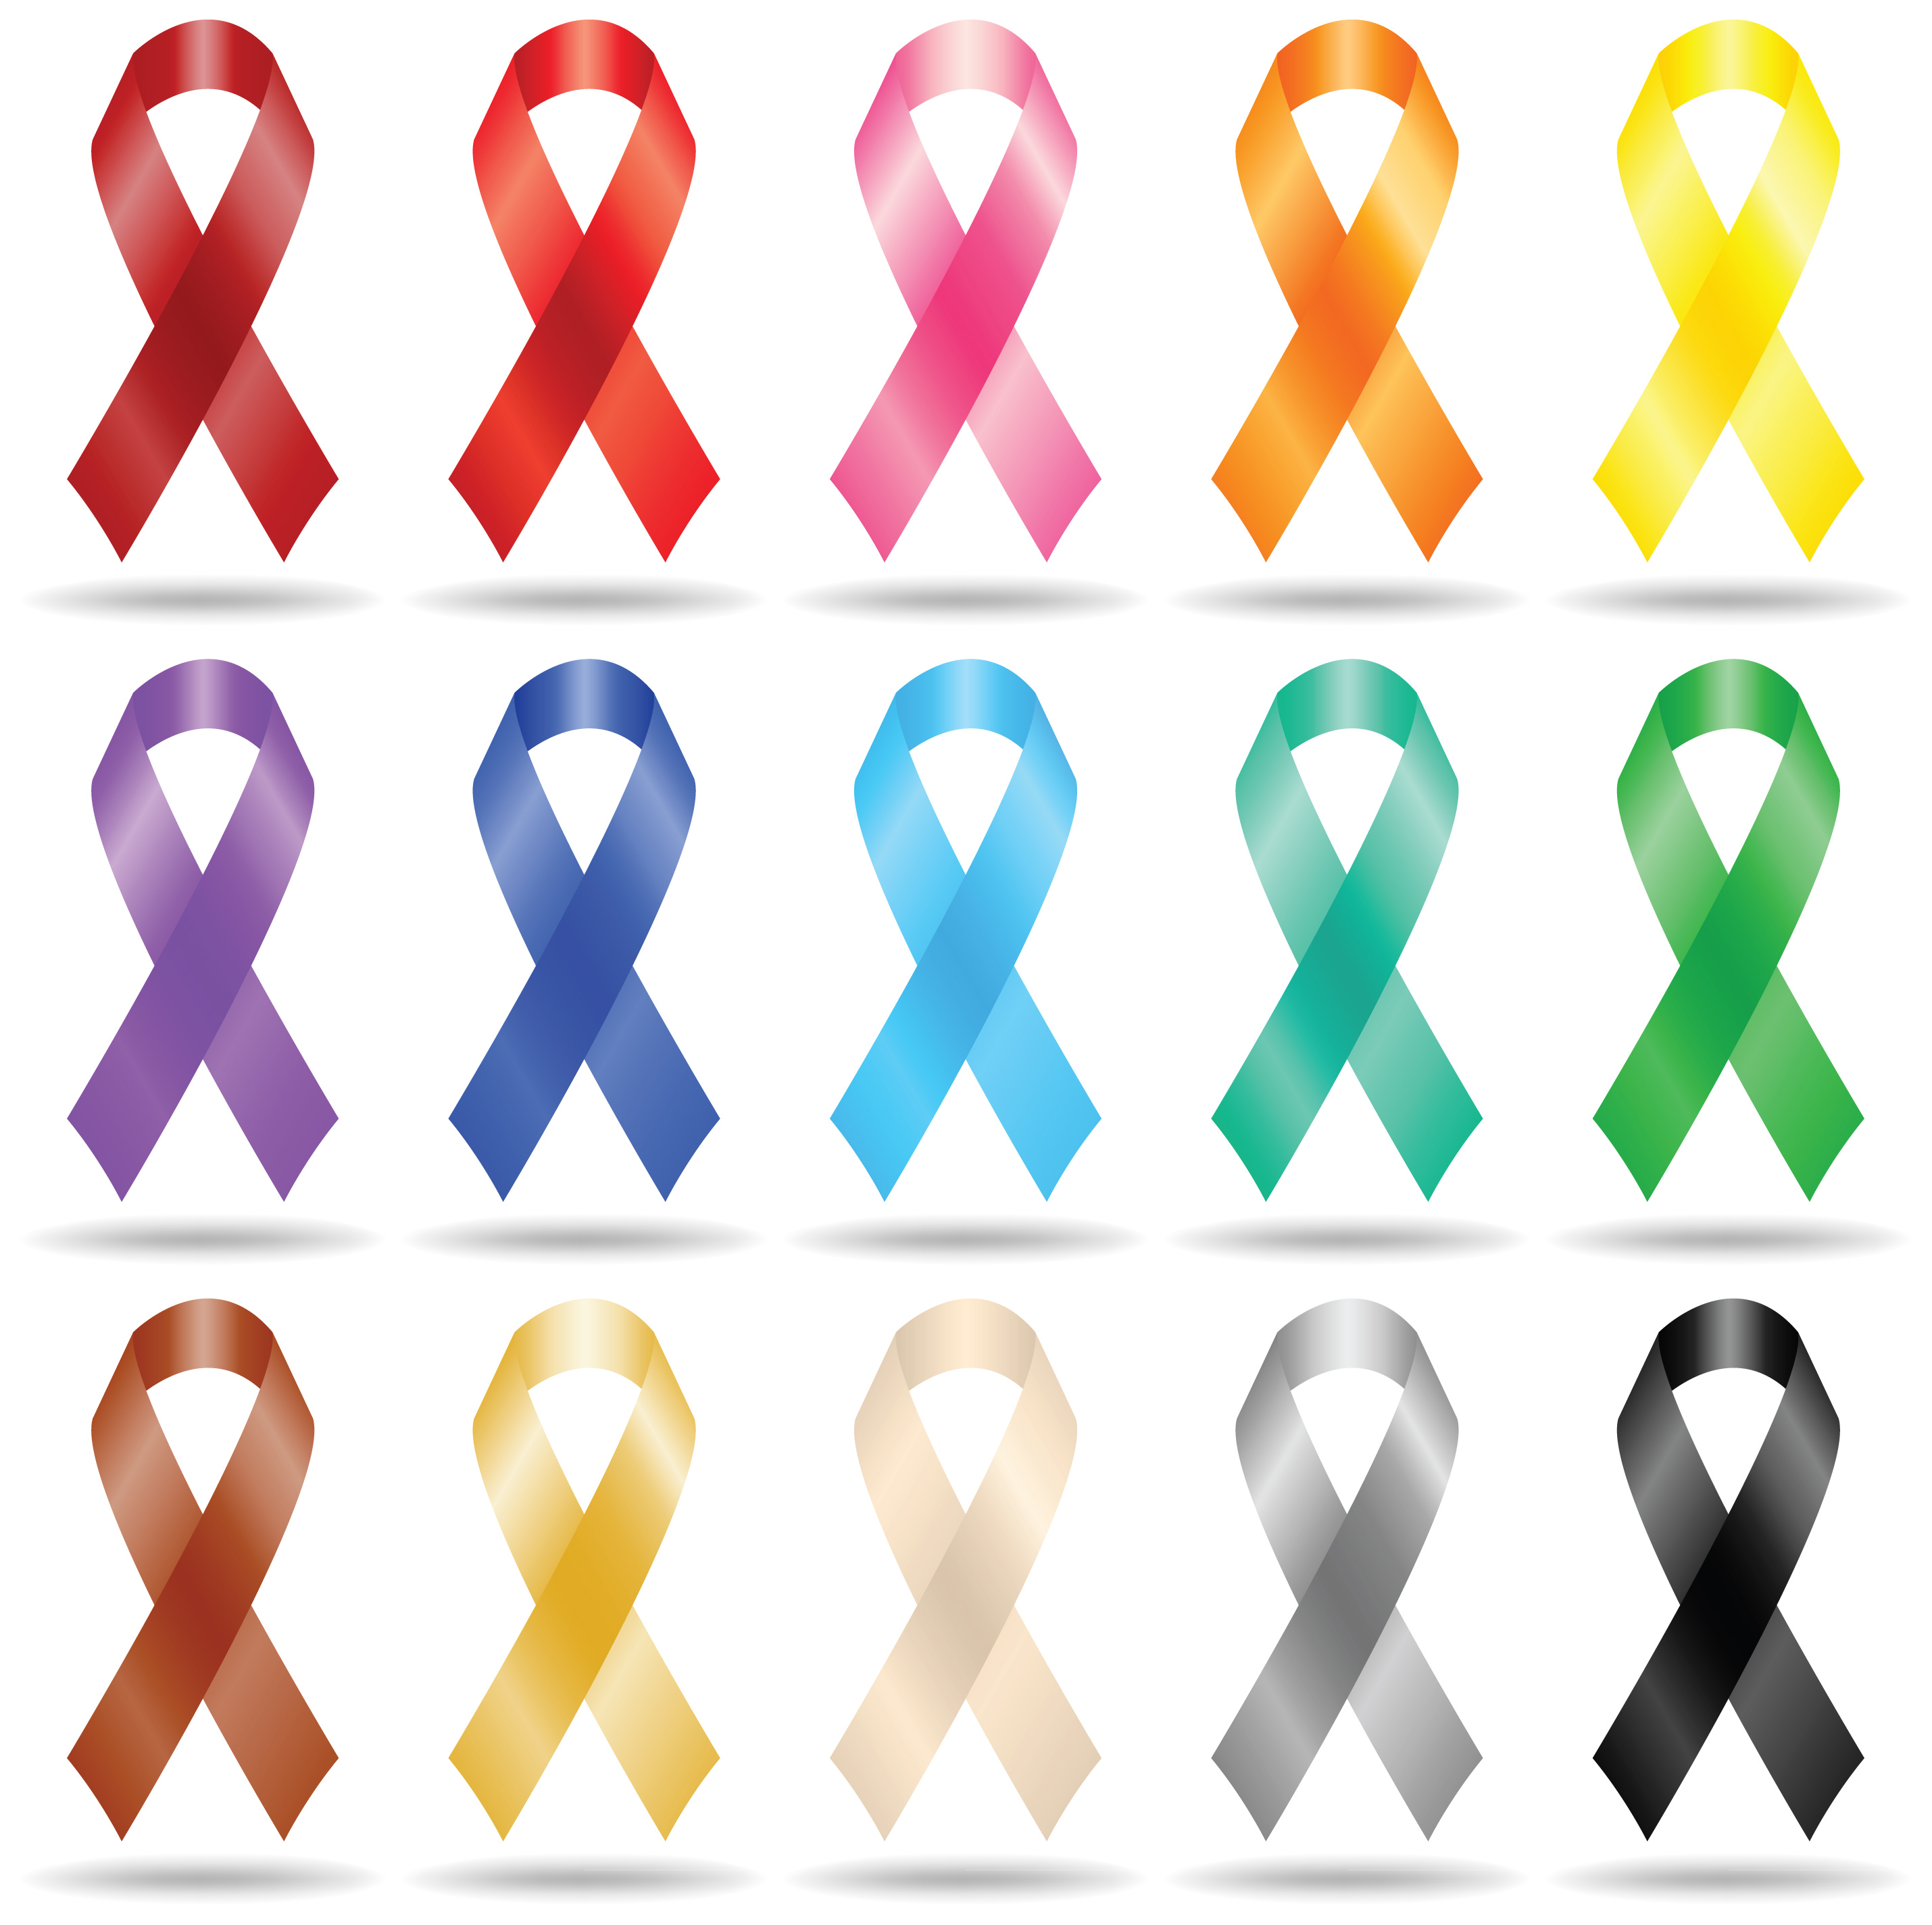 Cancer ribbon colors clipart.